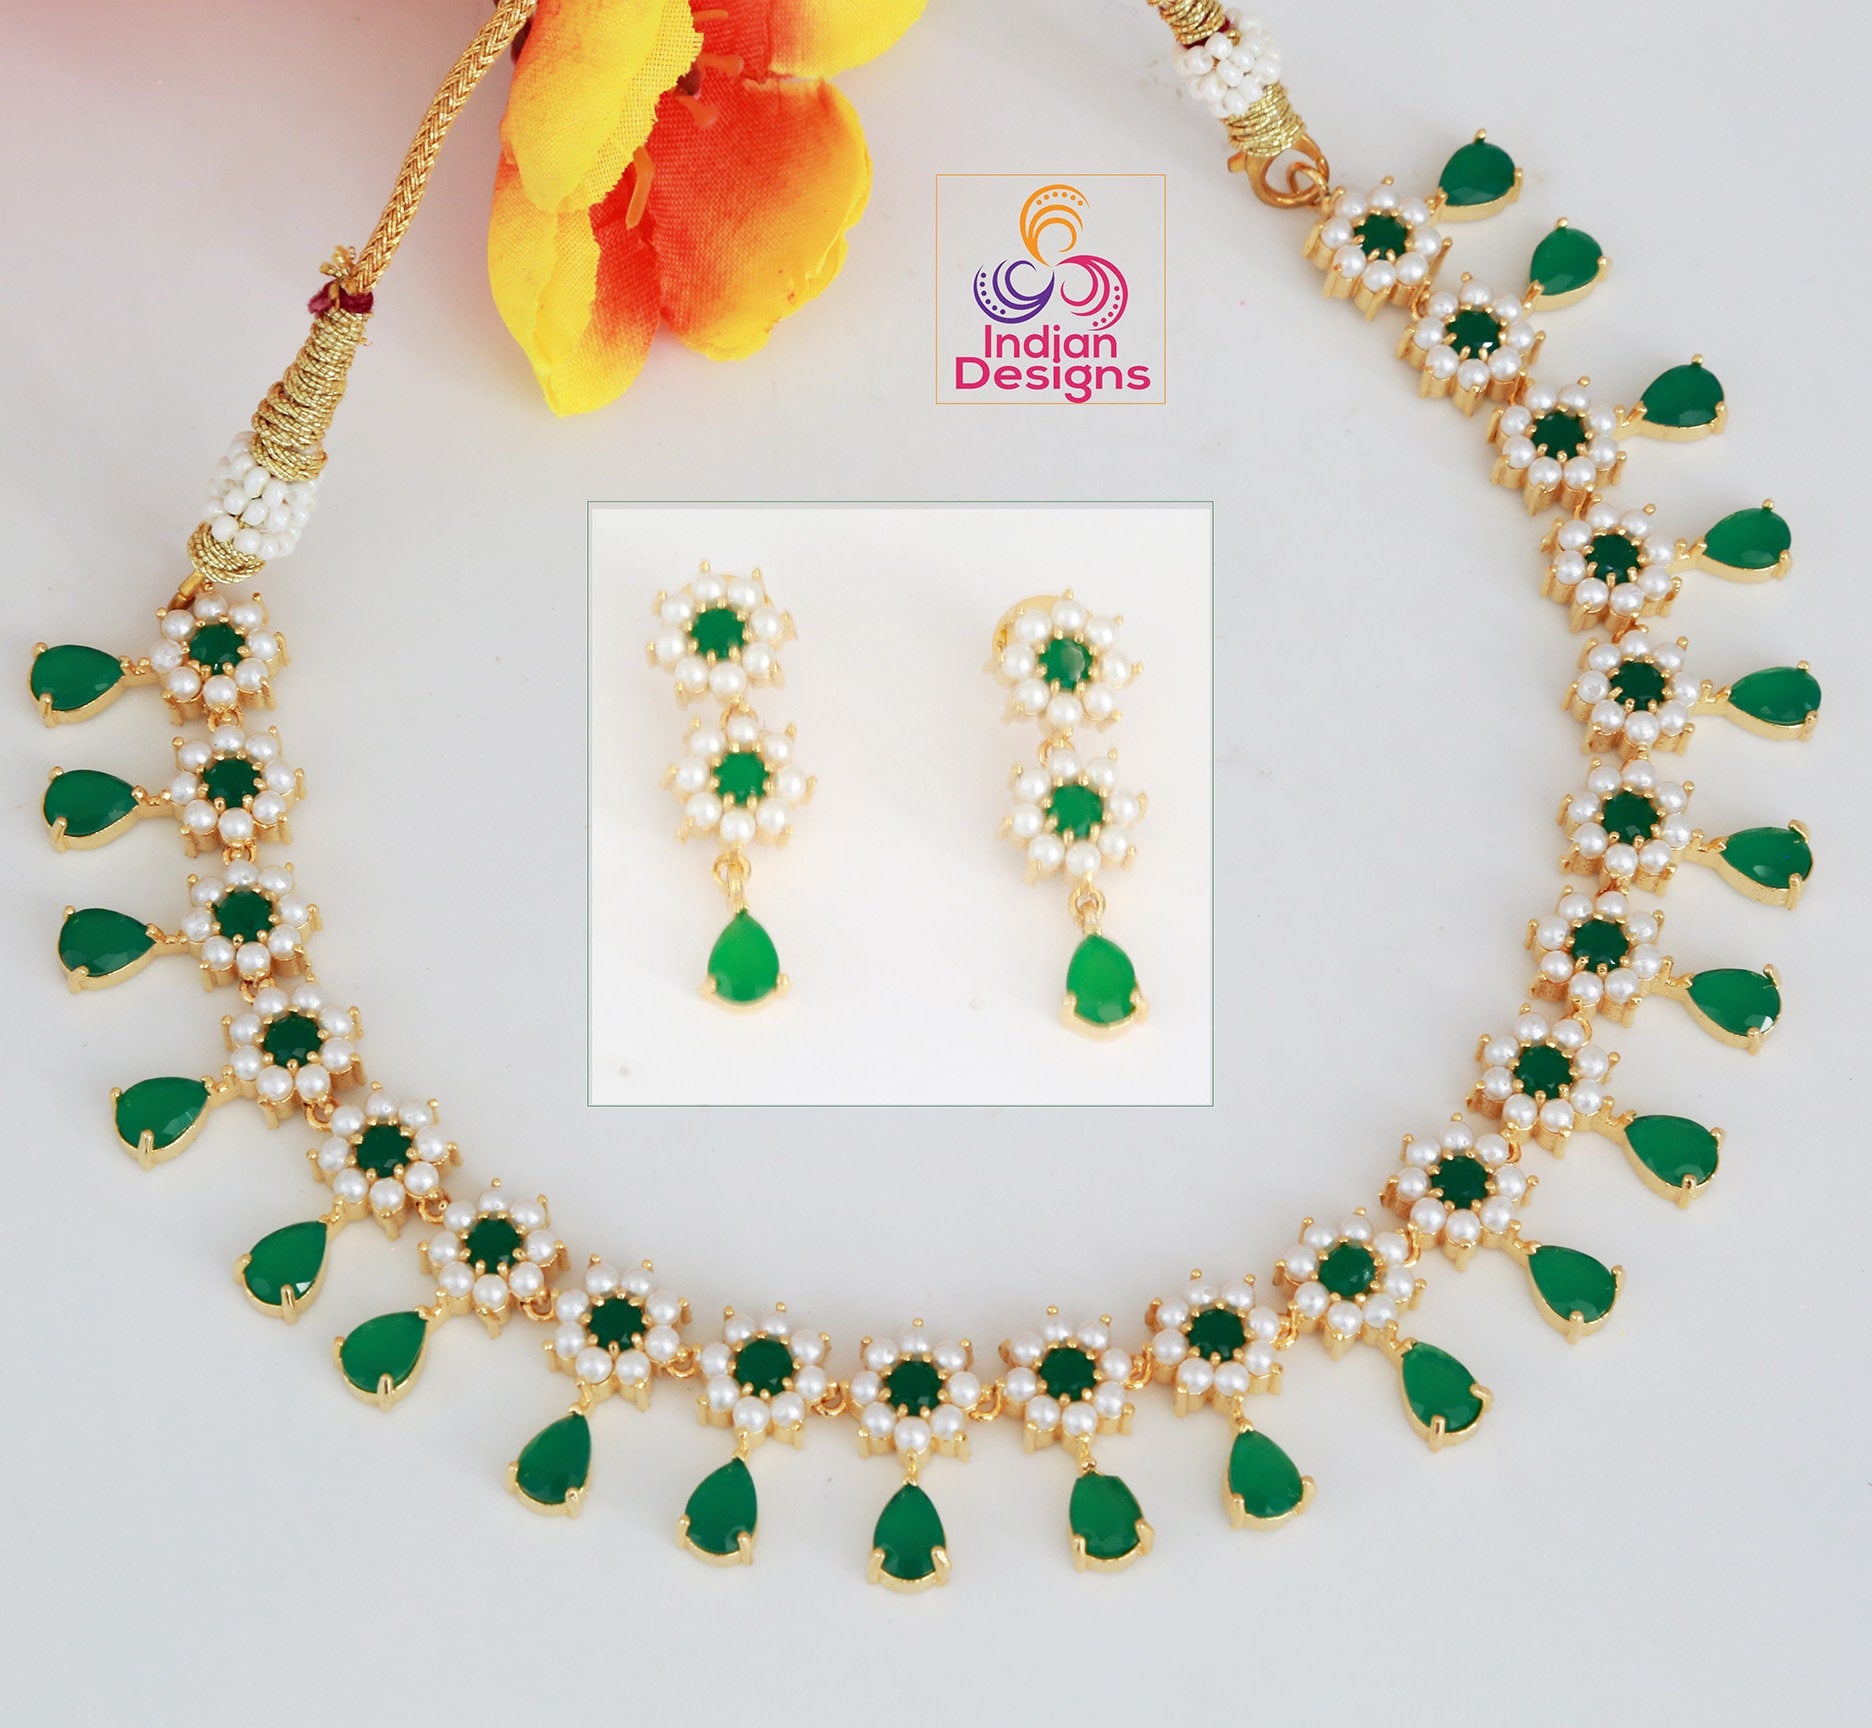 Pearl, Ruby & Emerald Statement Necklace with Matching Earrings |Traditional Indian Jewelry Set | High-End American Diamond Fashion Jewelry